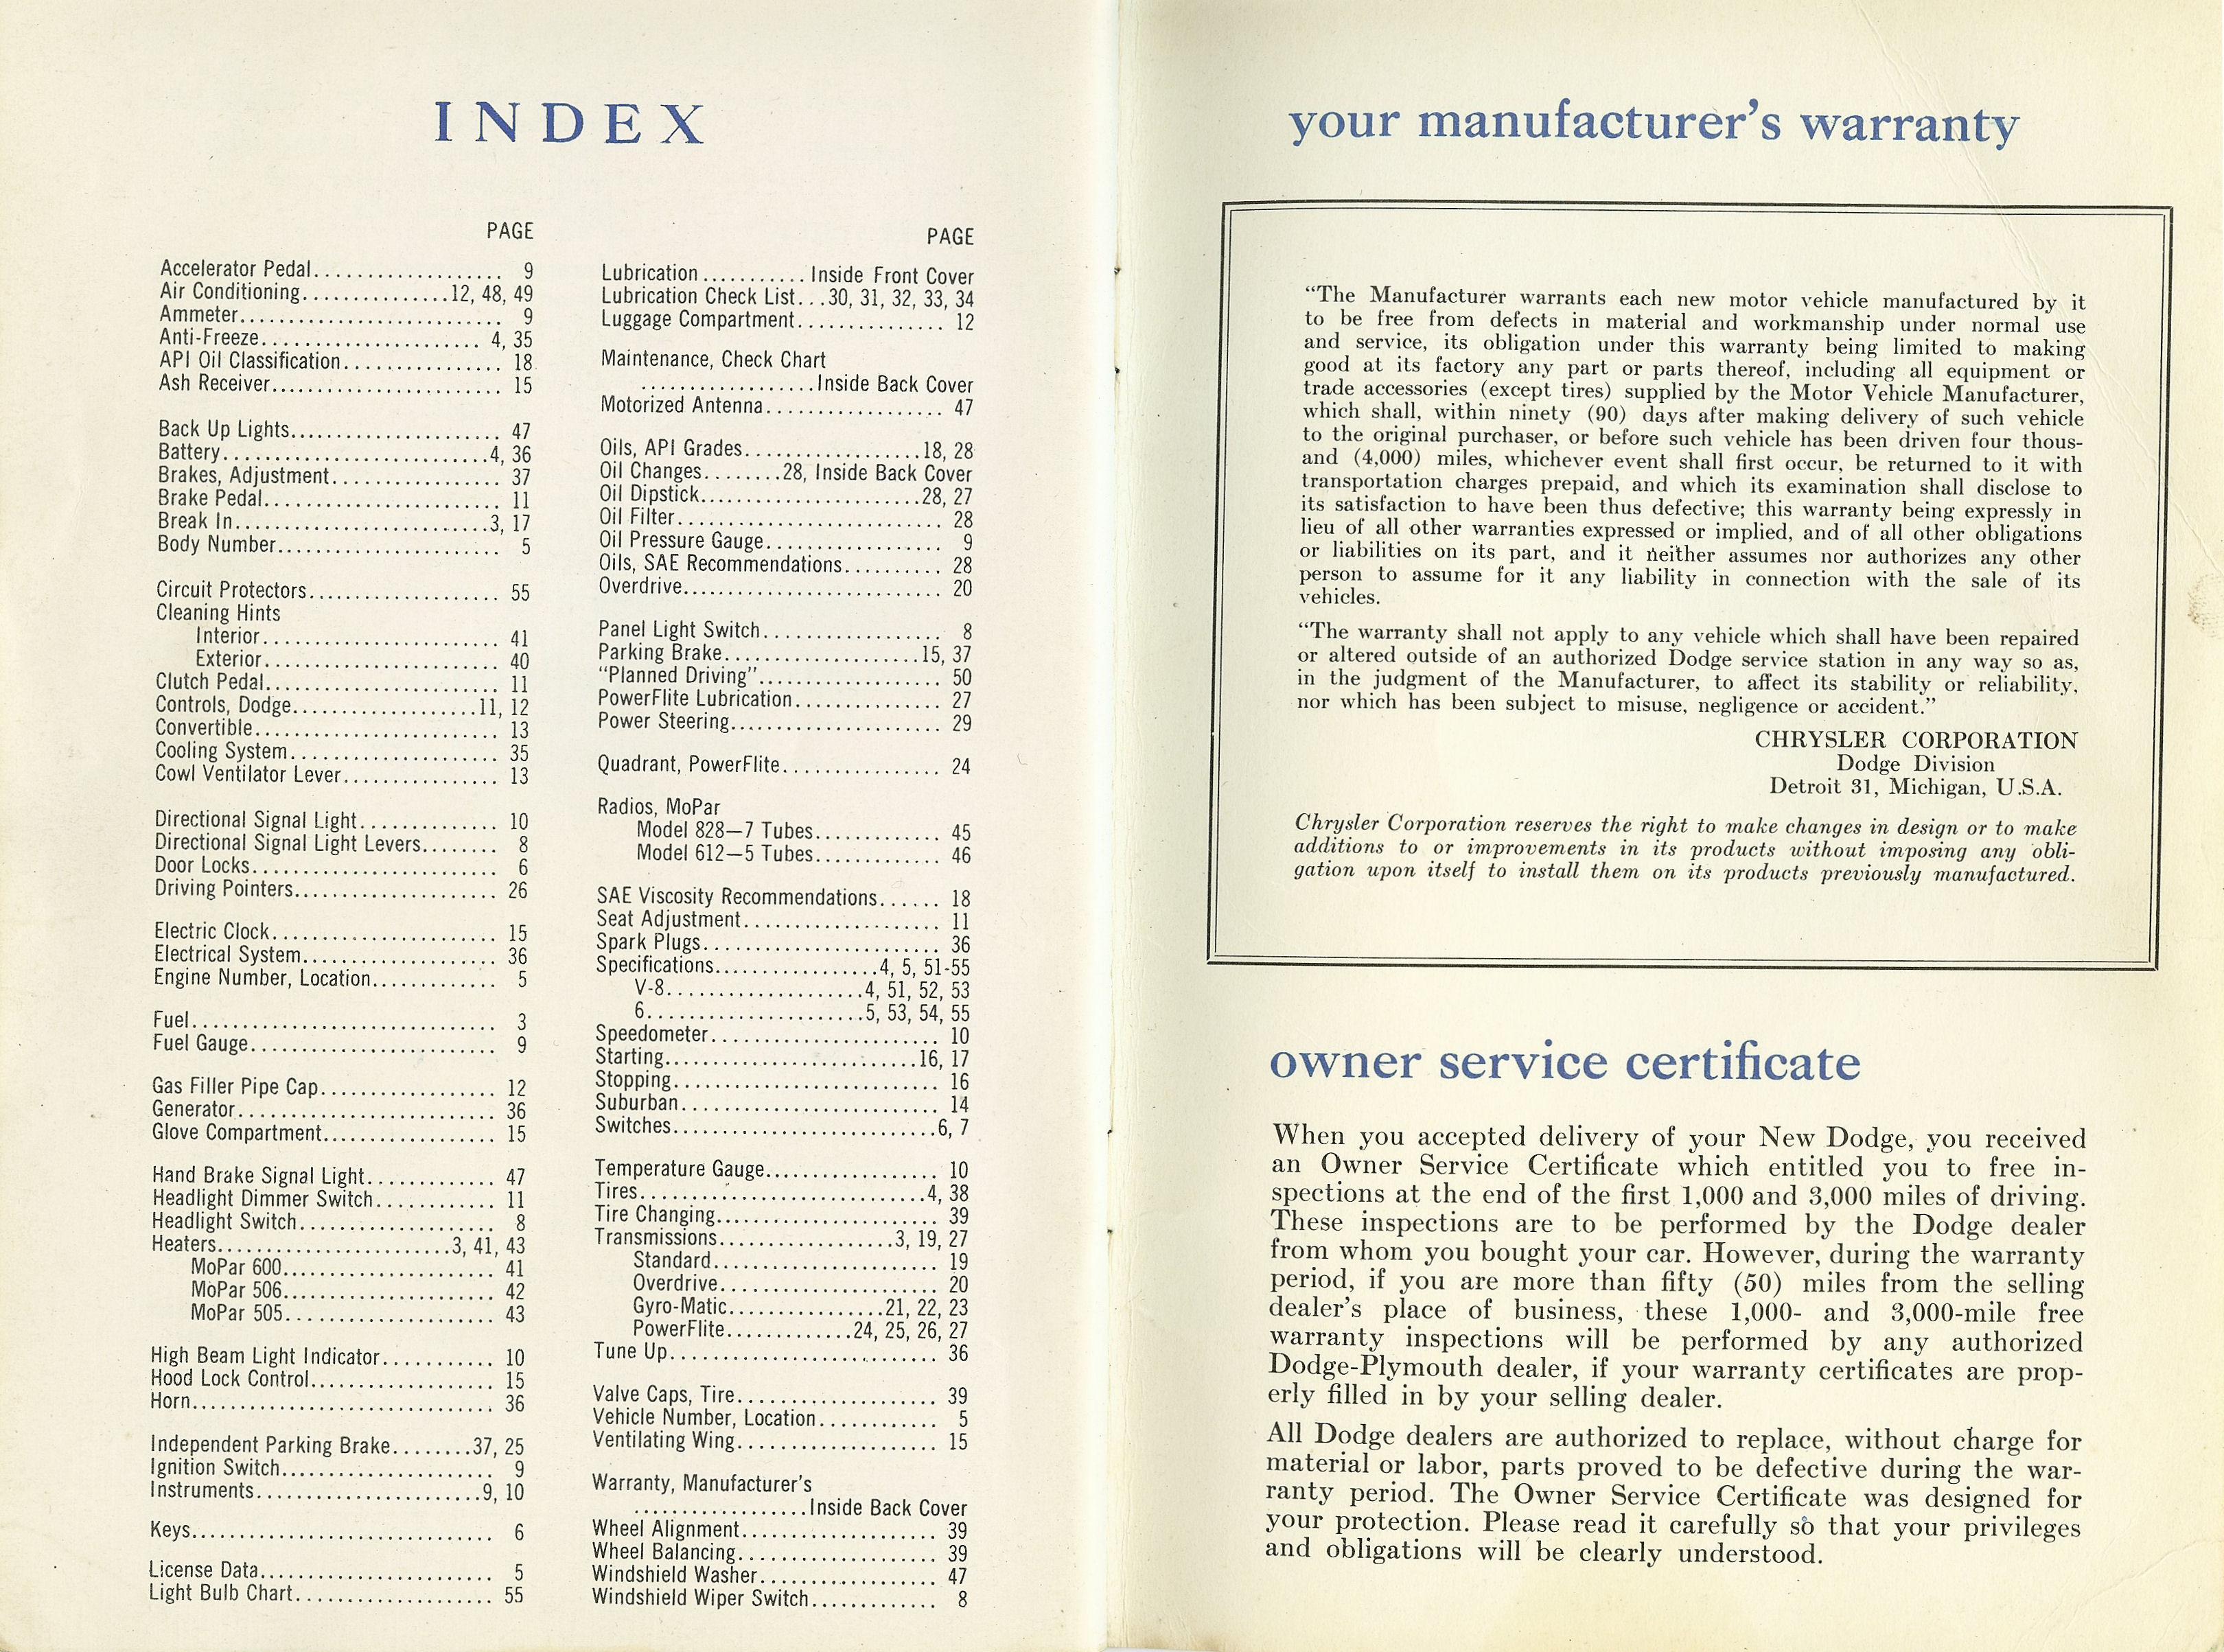 1954_Dodge_Owners_Manual-56-57